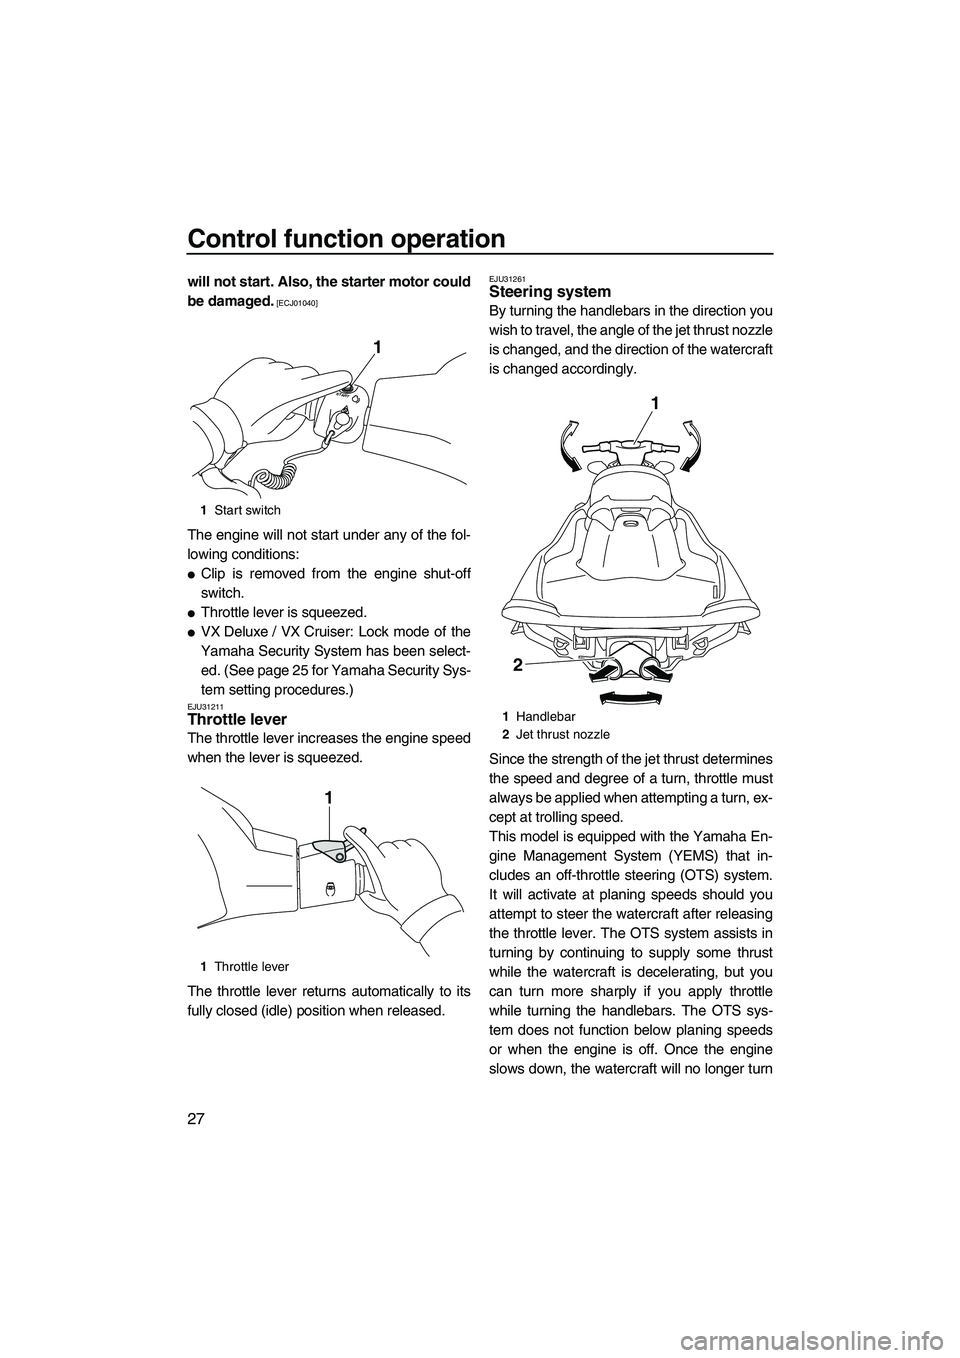 YAMAHA VX SPORT 2010 Owners Guide Control function operation
27
will not start. Also, the starter motor could
be damaged.
 [ECJ01040]
The engine will not start under any of the fol-
lowing conditions:
Clip is removed from the engine 